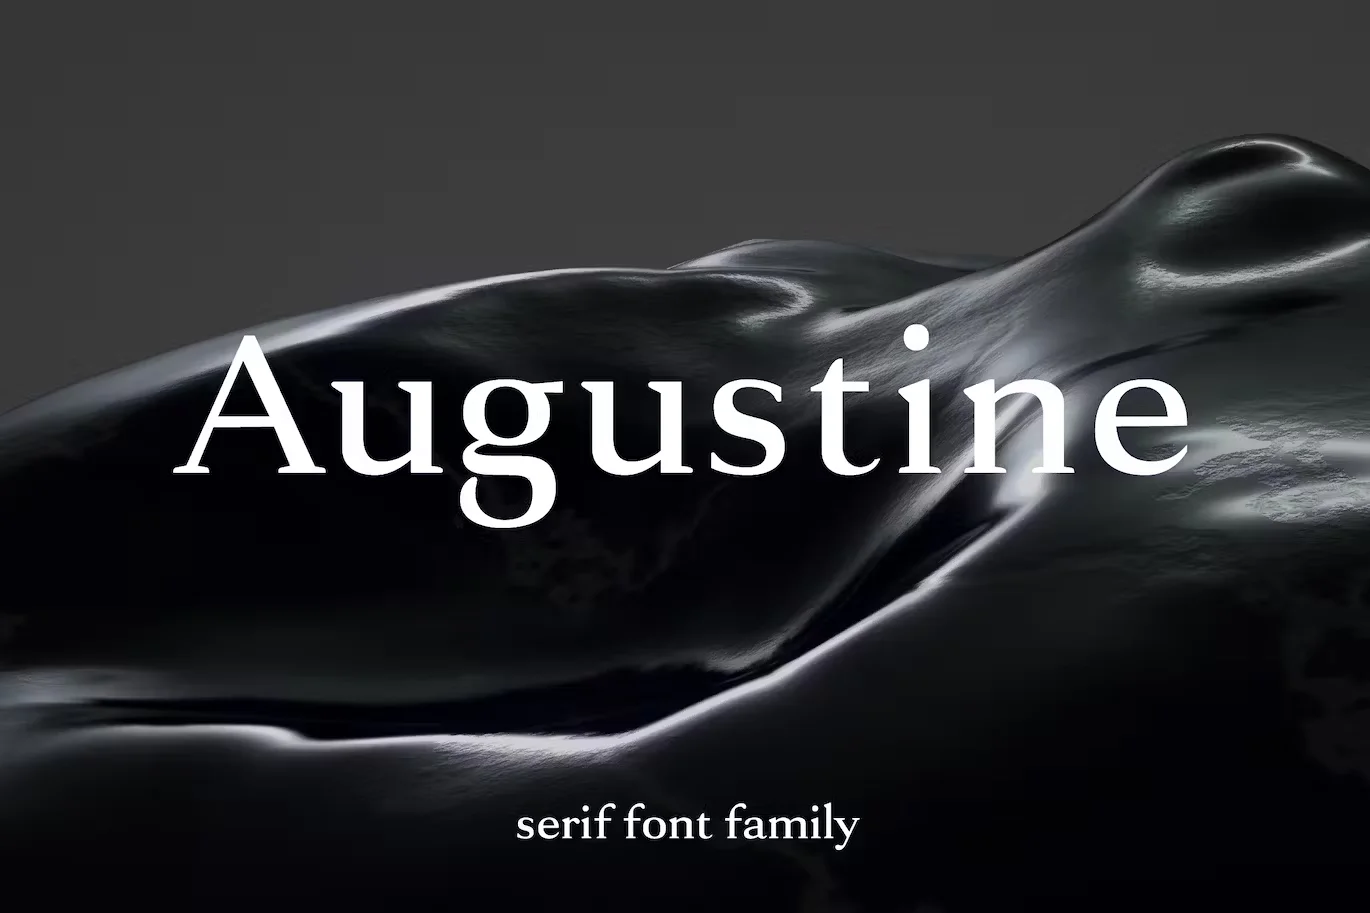 Augustine - A Strong Serif Typeface it can be used as one of the best fonts for book covers